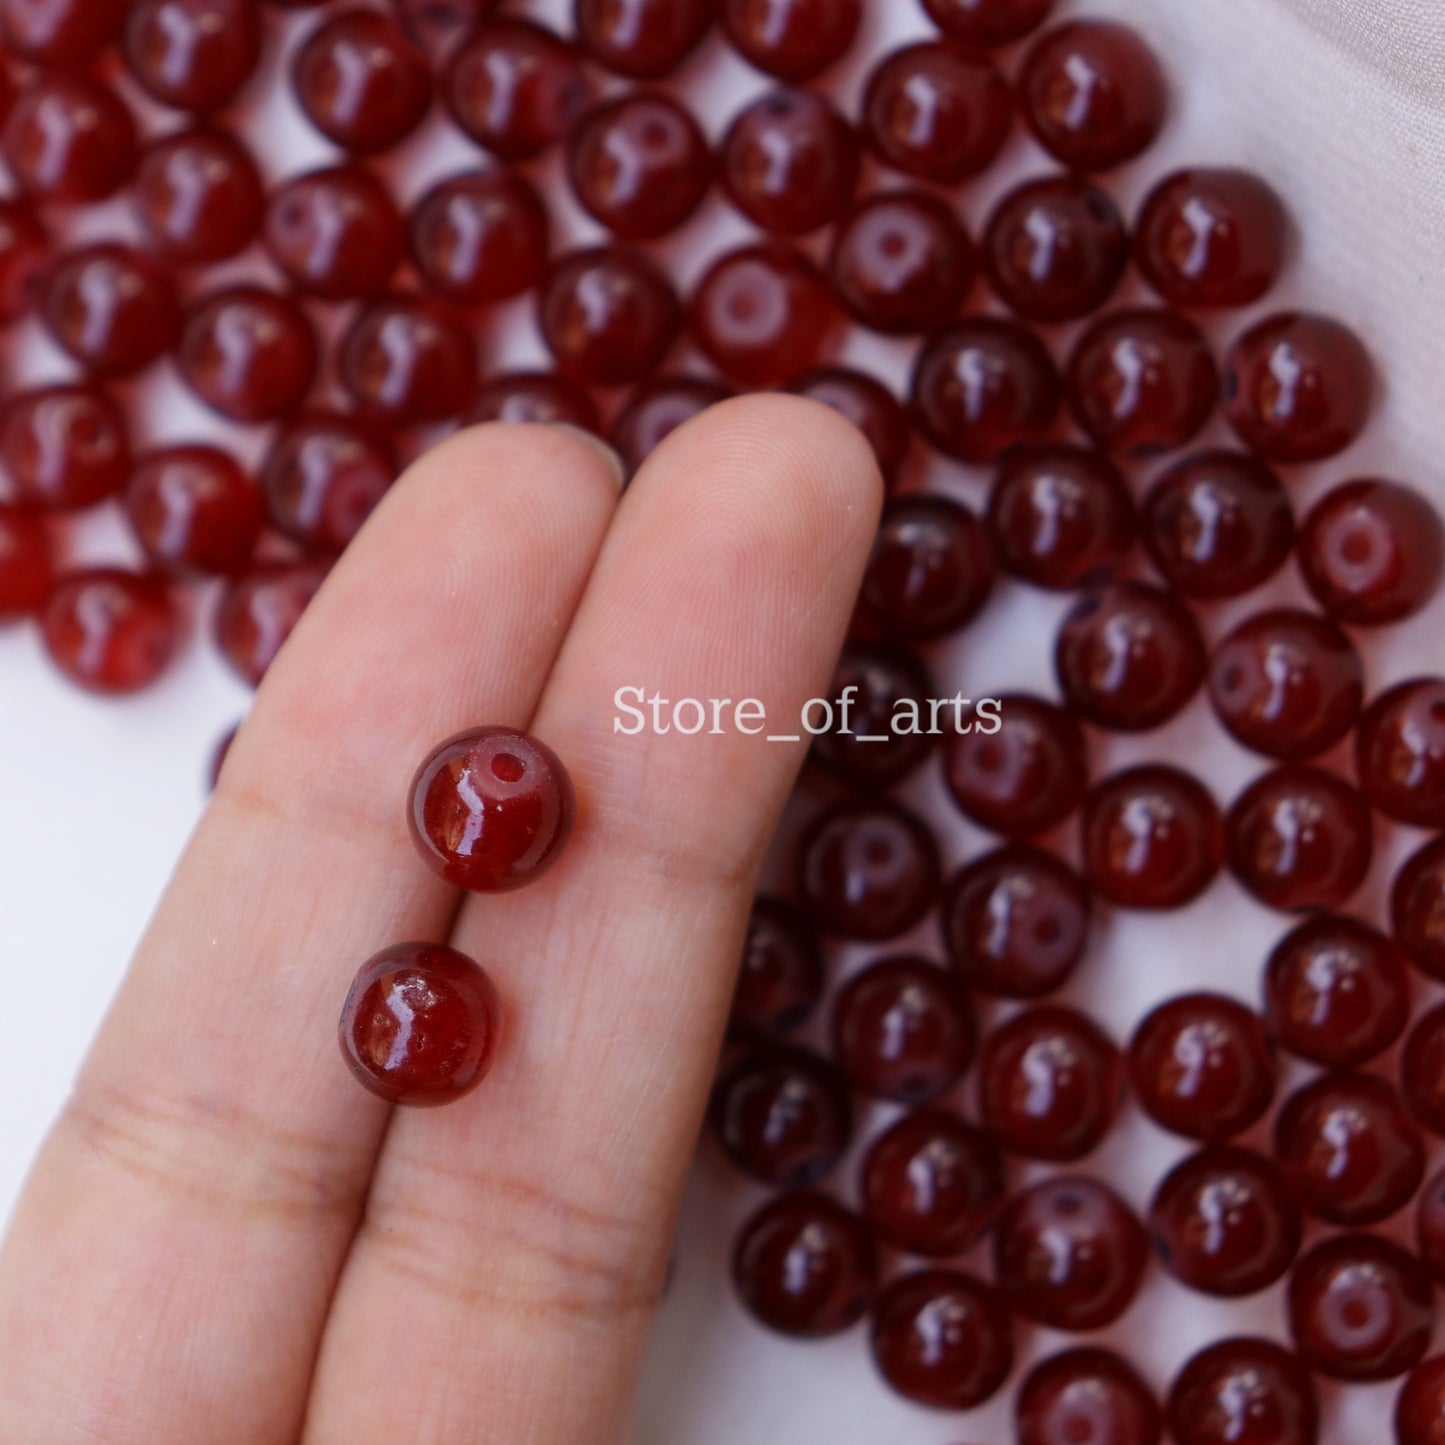 Glass beads of 8mm White and Maroon beads combo for jewelry making, DIY craft, other decoration items, Each pack contains 100pcs (Total 200pcs)